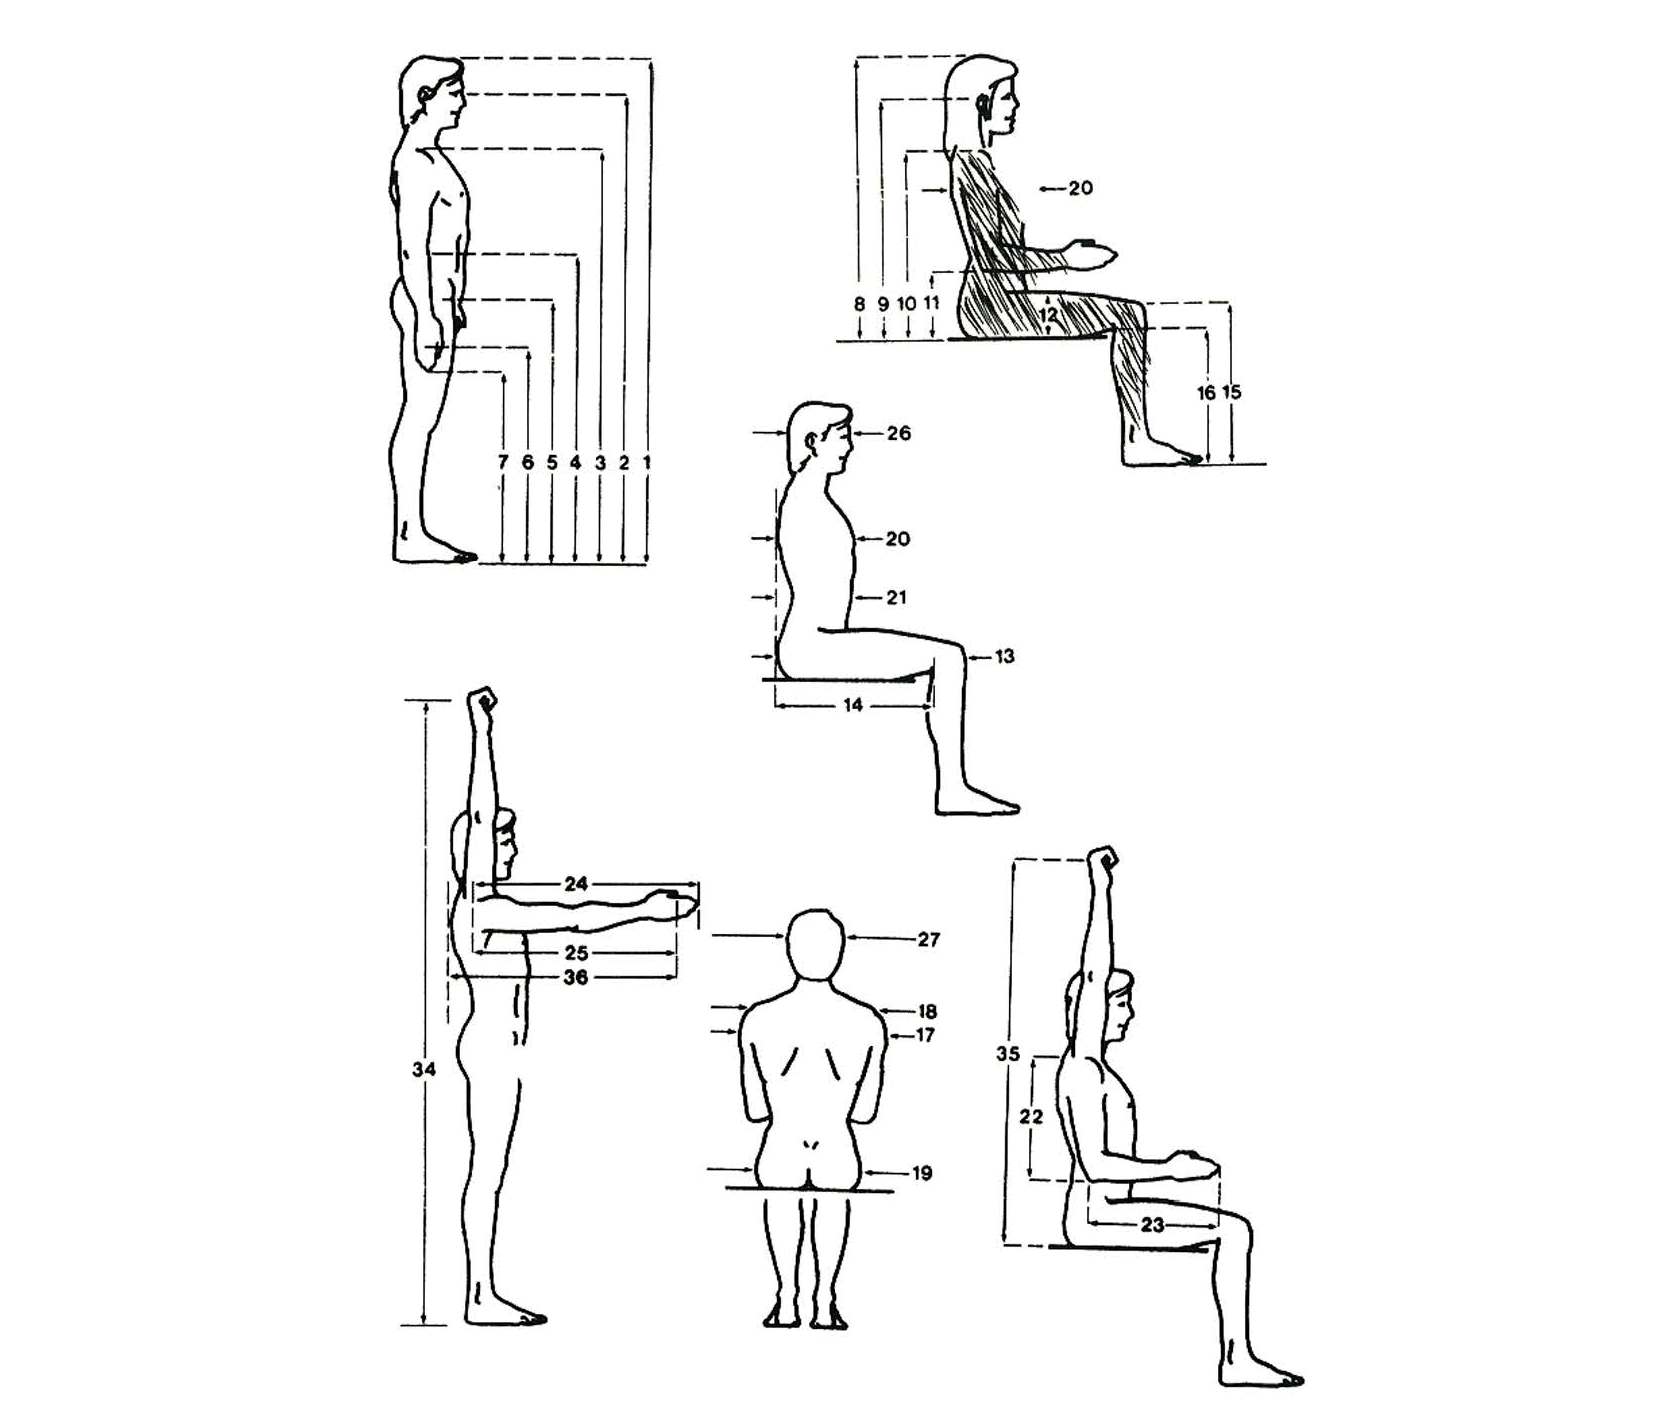 Pages from Ergonomy.jpg